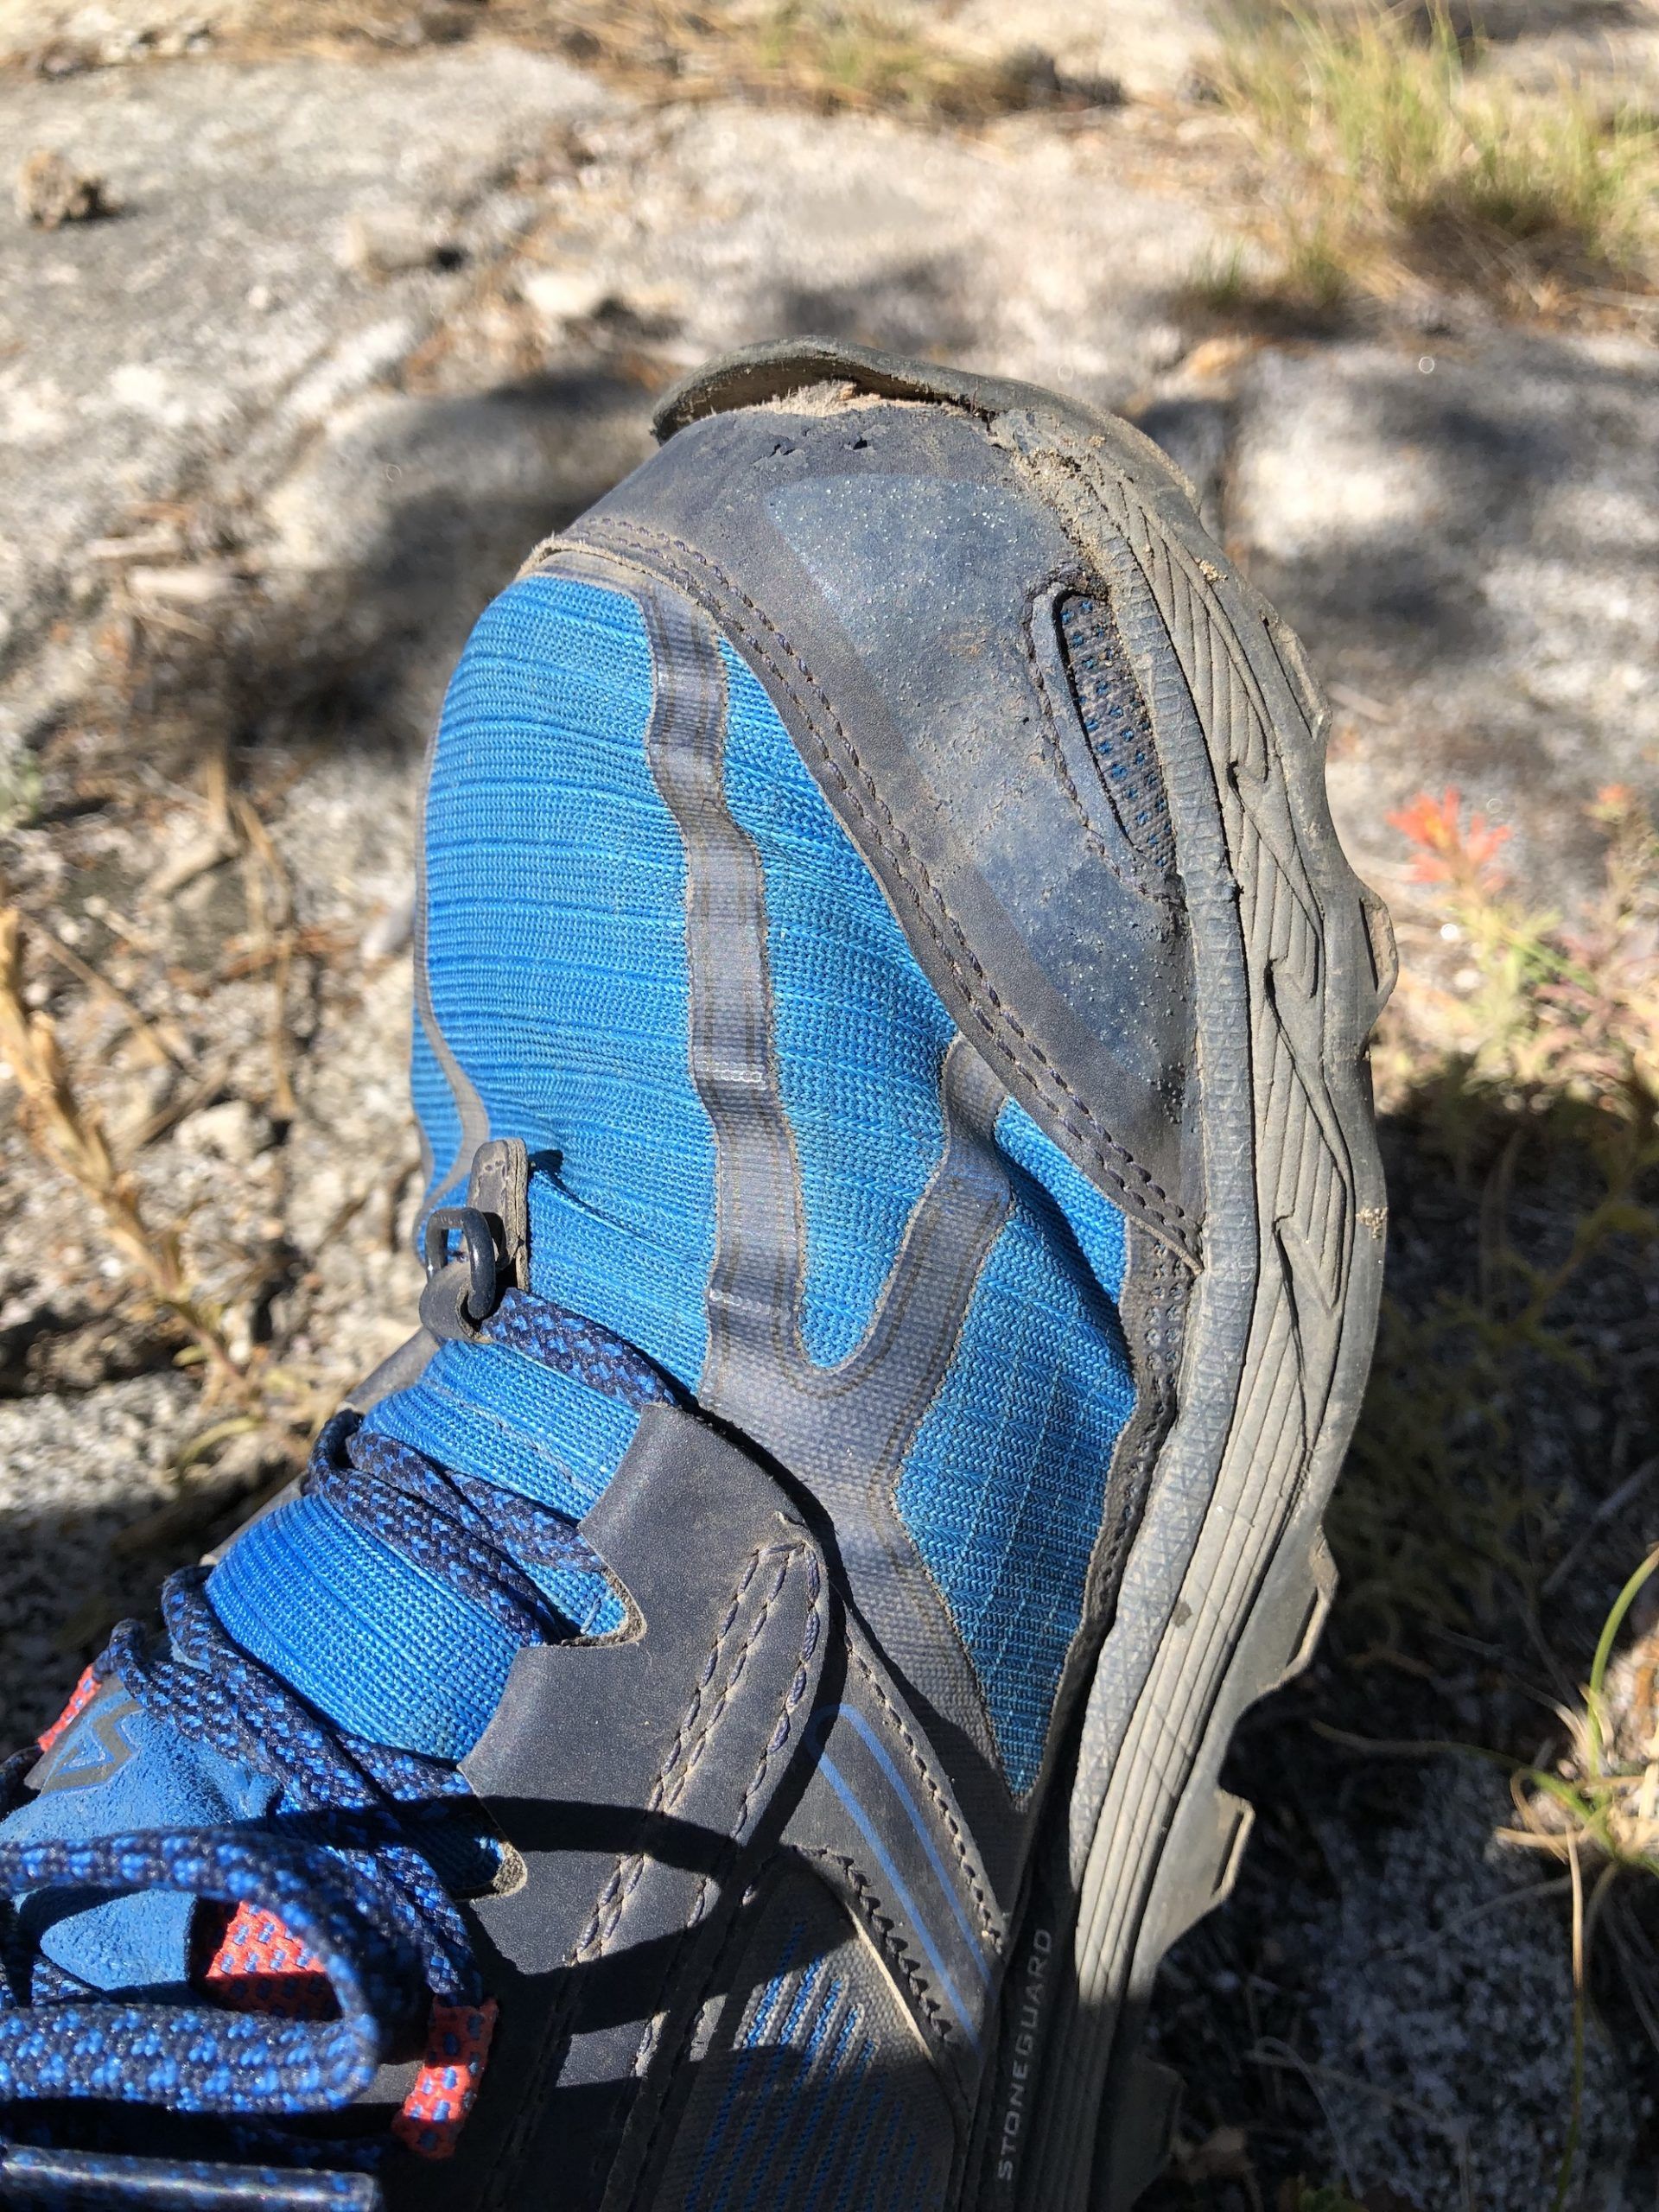 Altra Lone Peak 4.0 with separated toe guard.